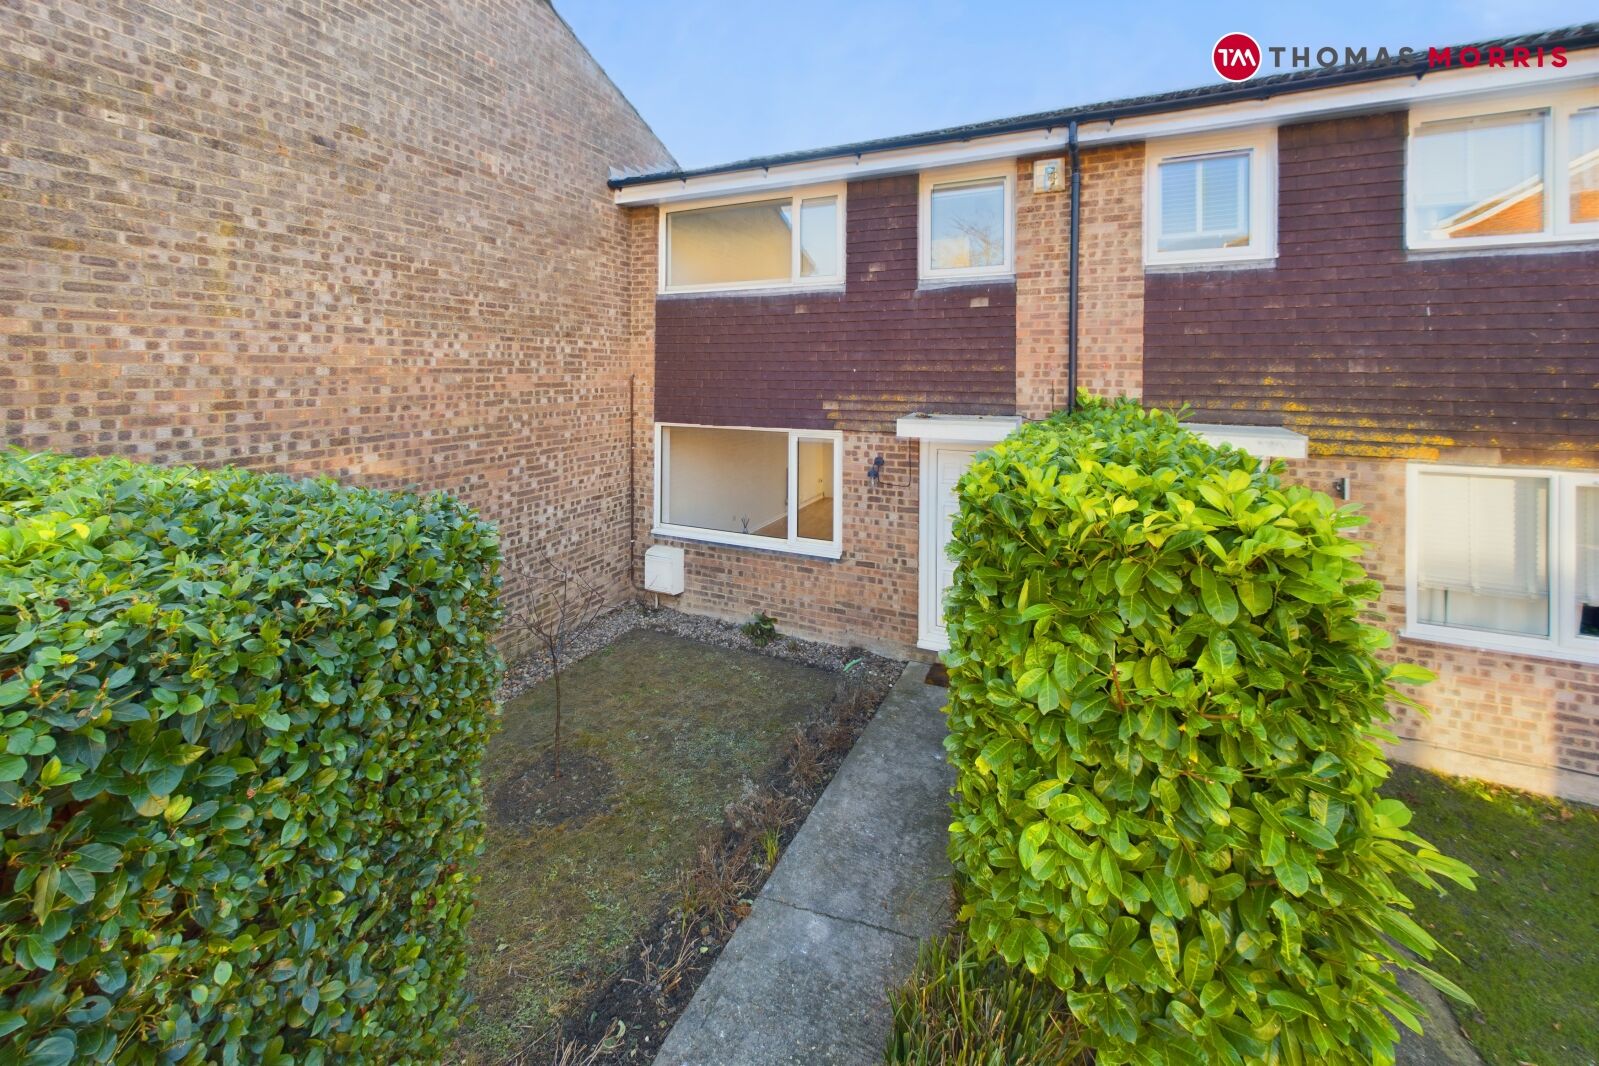 3 bedroom mid terraced house for sale Thackeray Close, Royston, SG8, main image